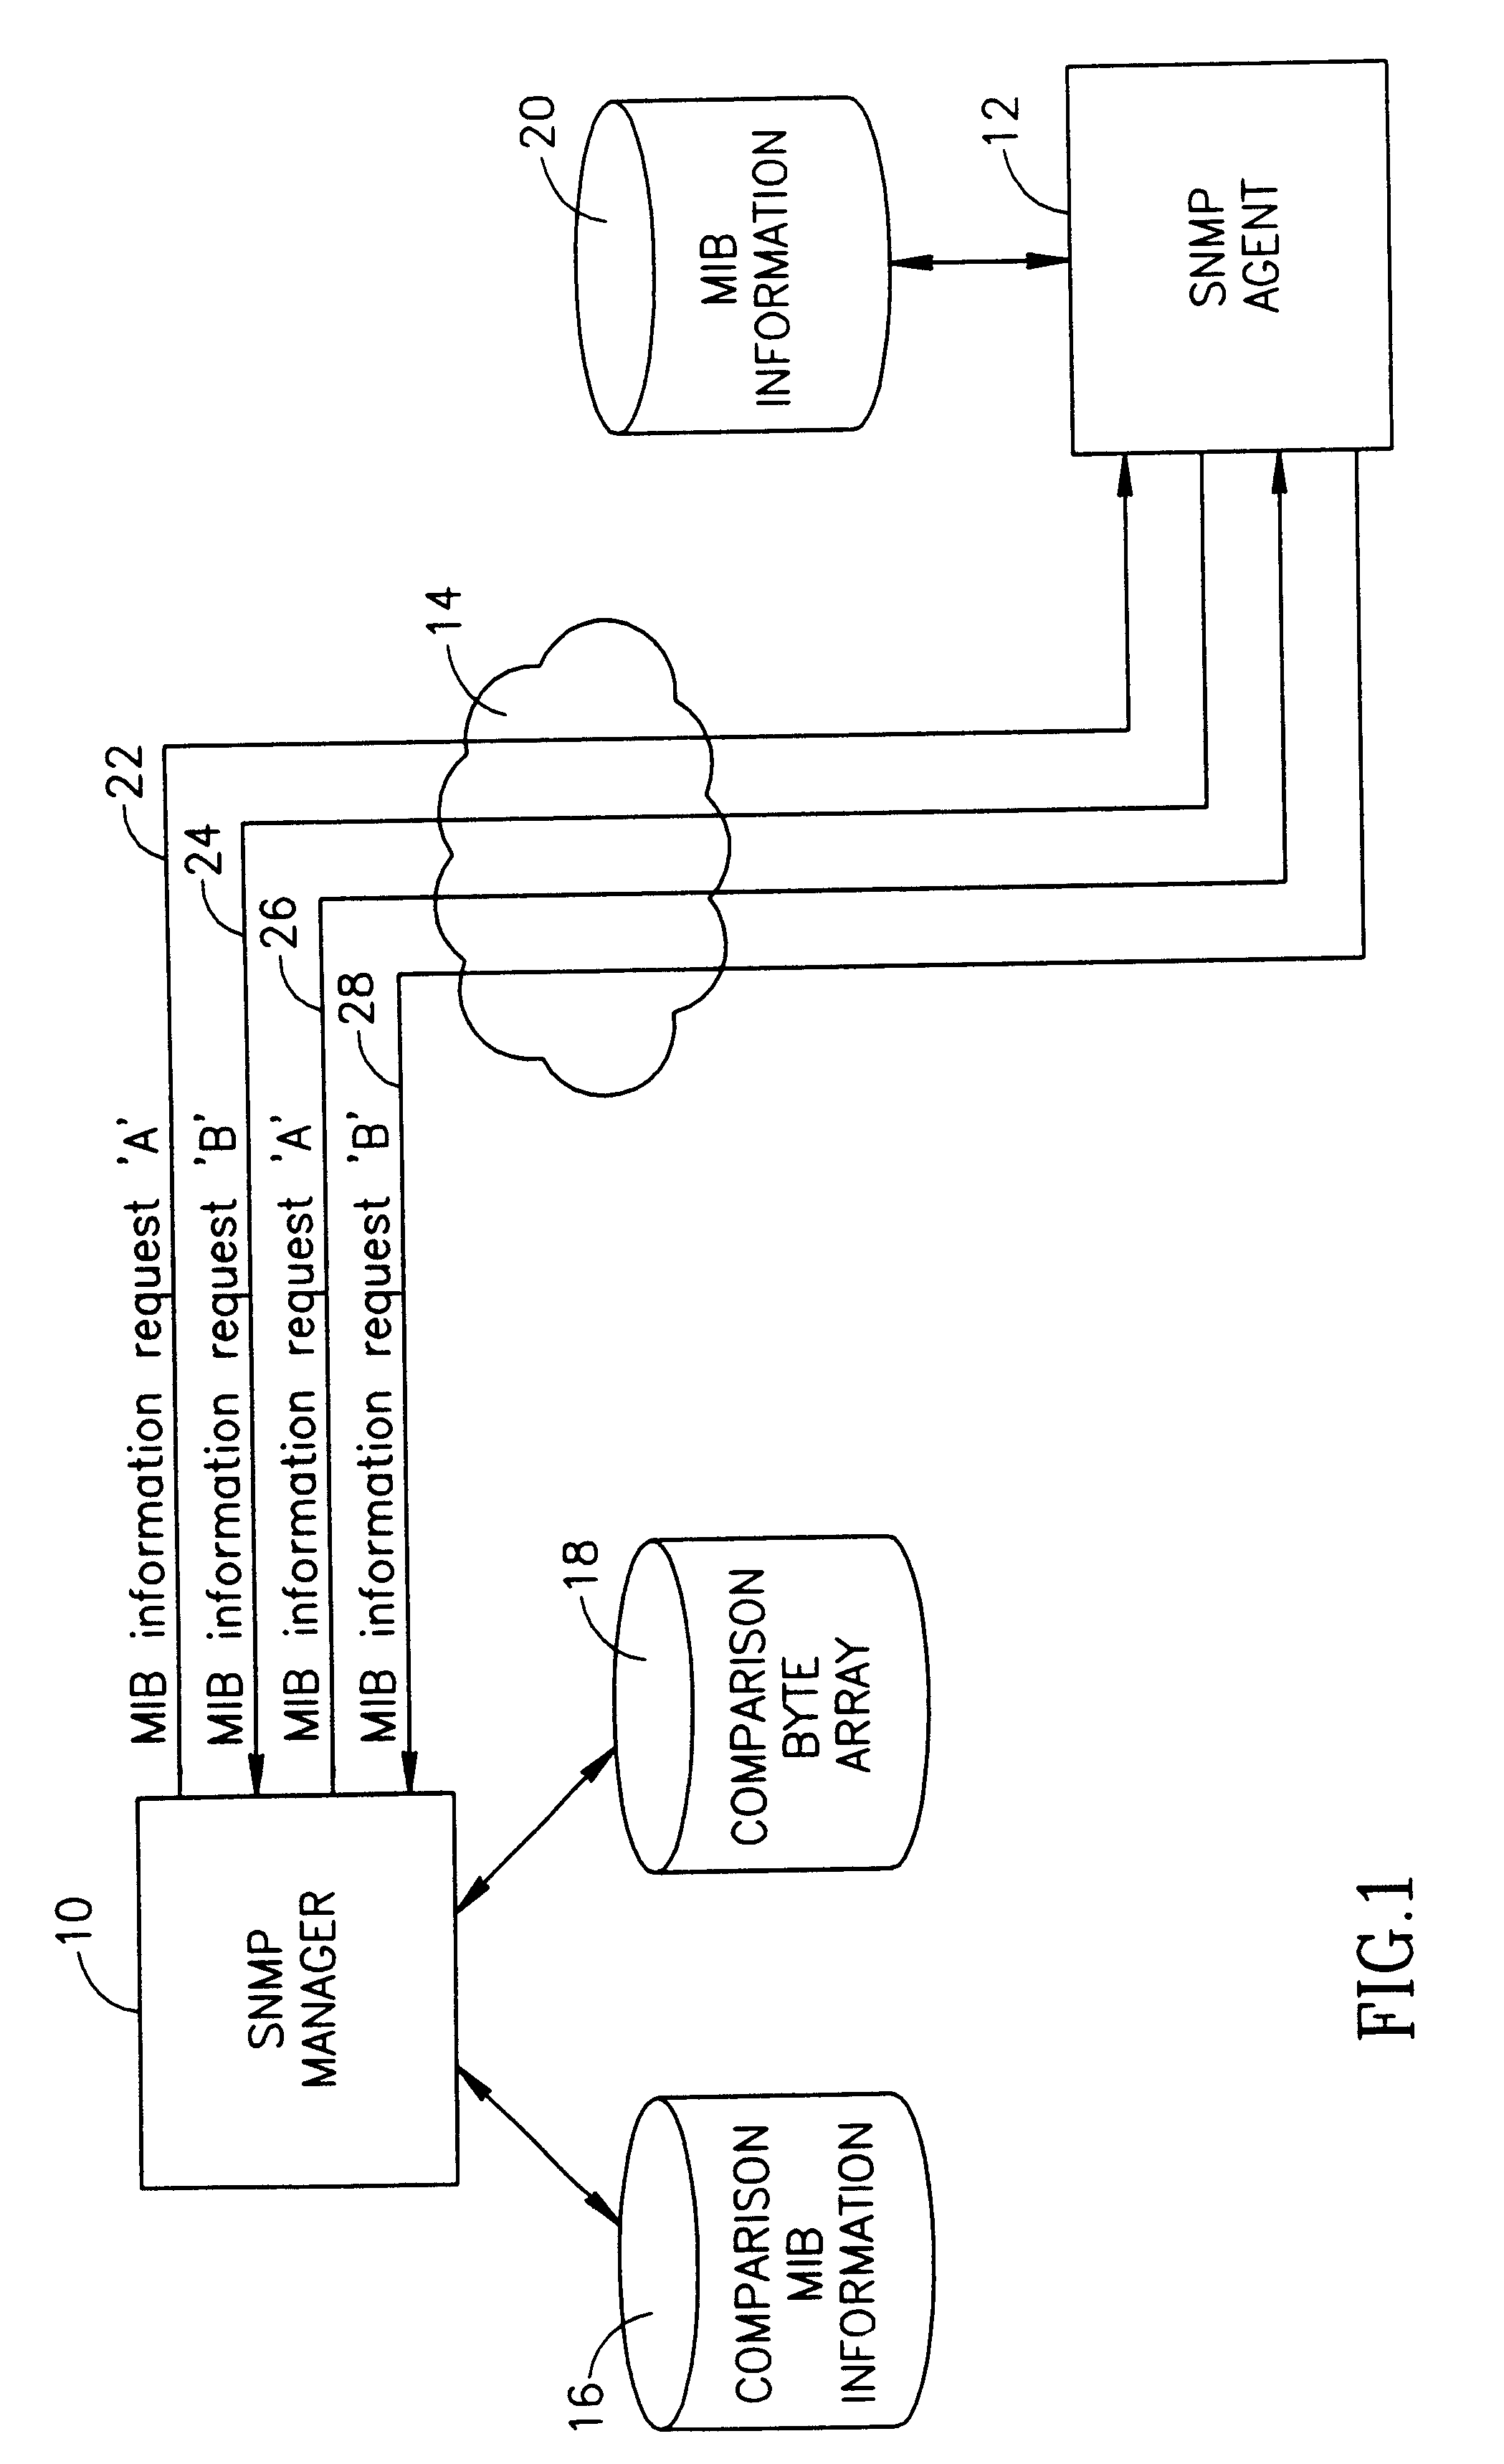 Methods and apparatus for optimizing simple network management protocol (SNMP) requests